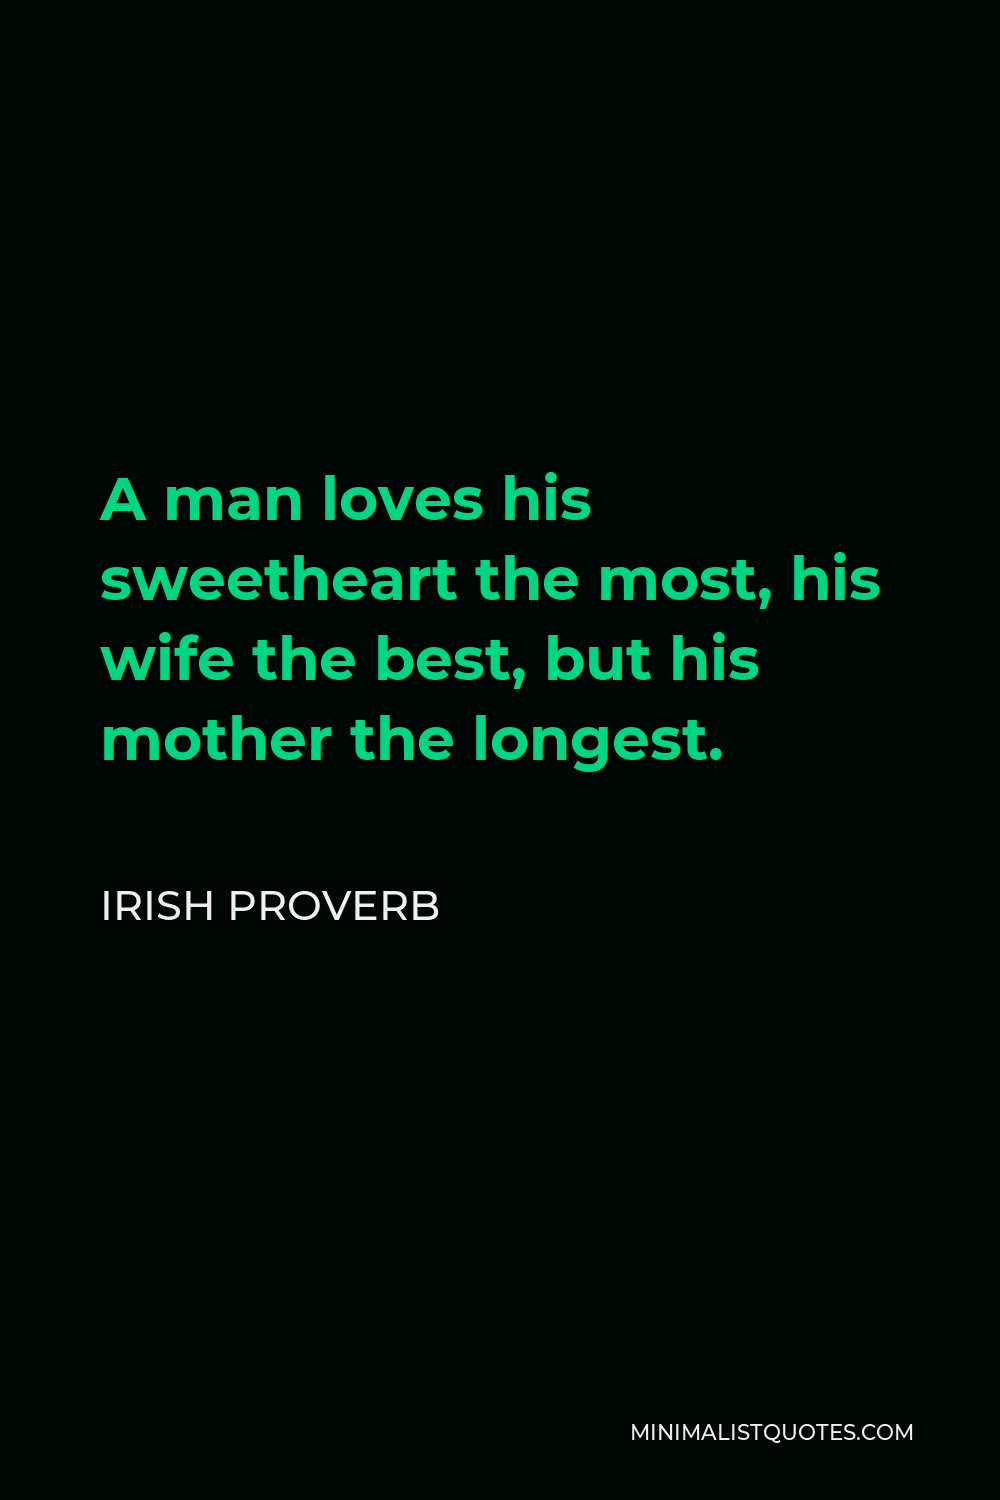 Irish Proverb Quote - A man loves his sweetheart the most, his wife the best, but his mother the longest.